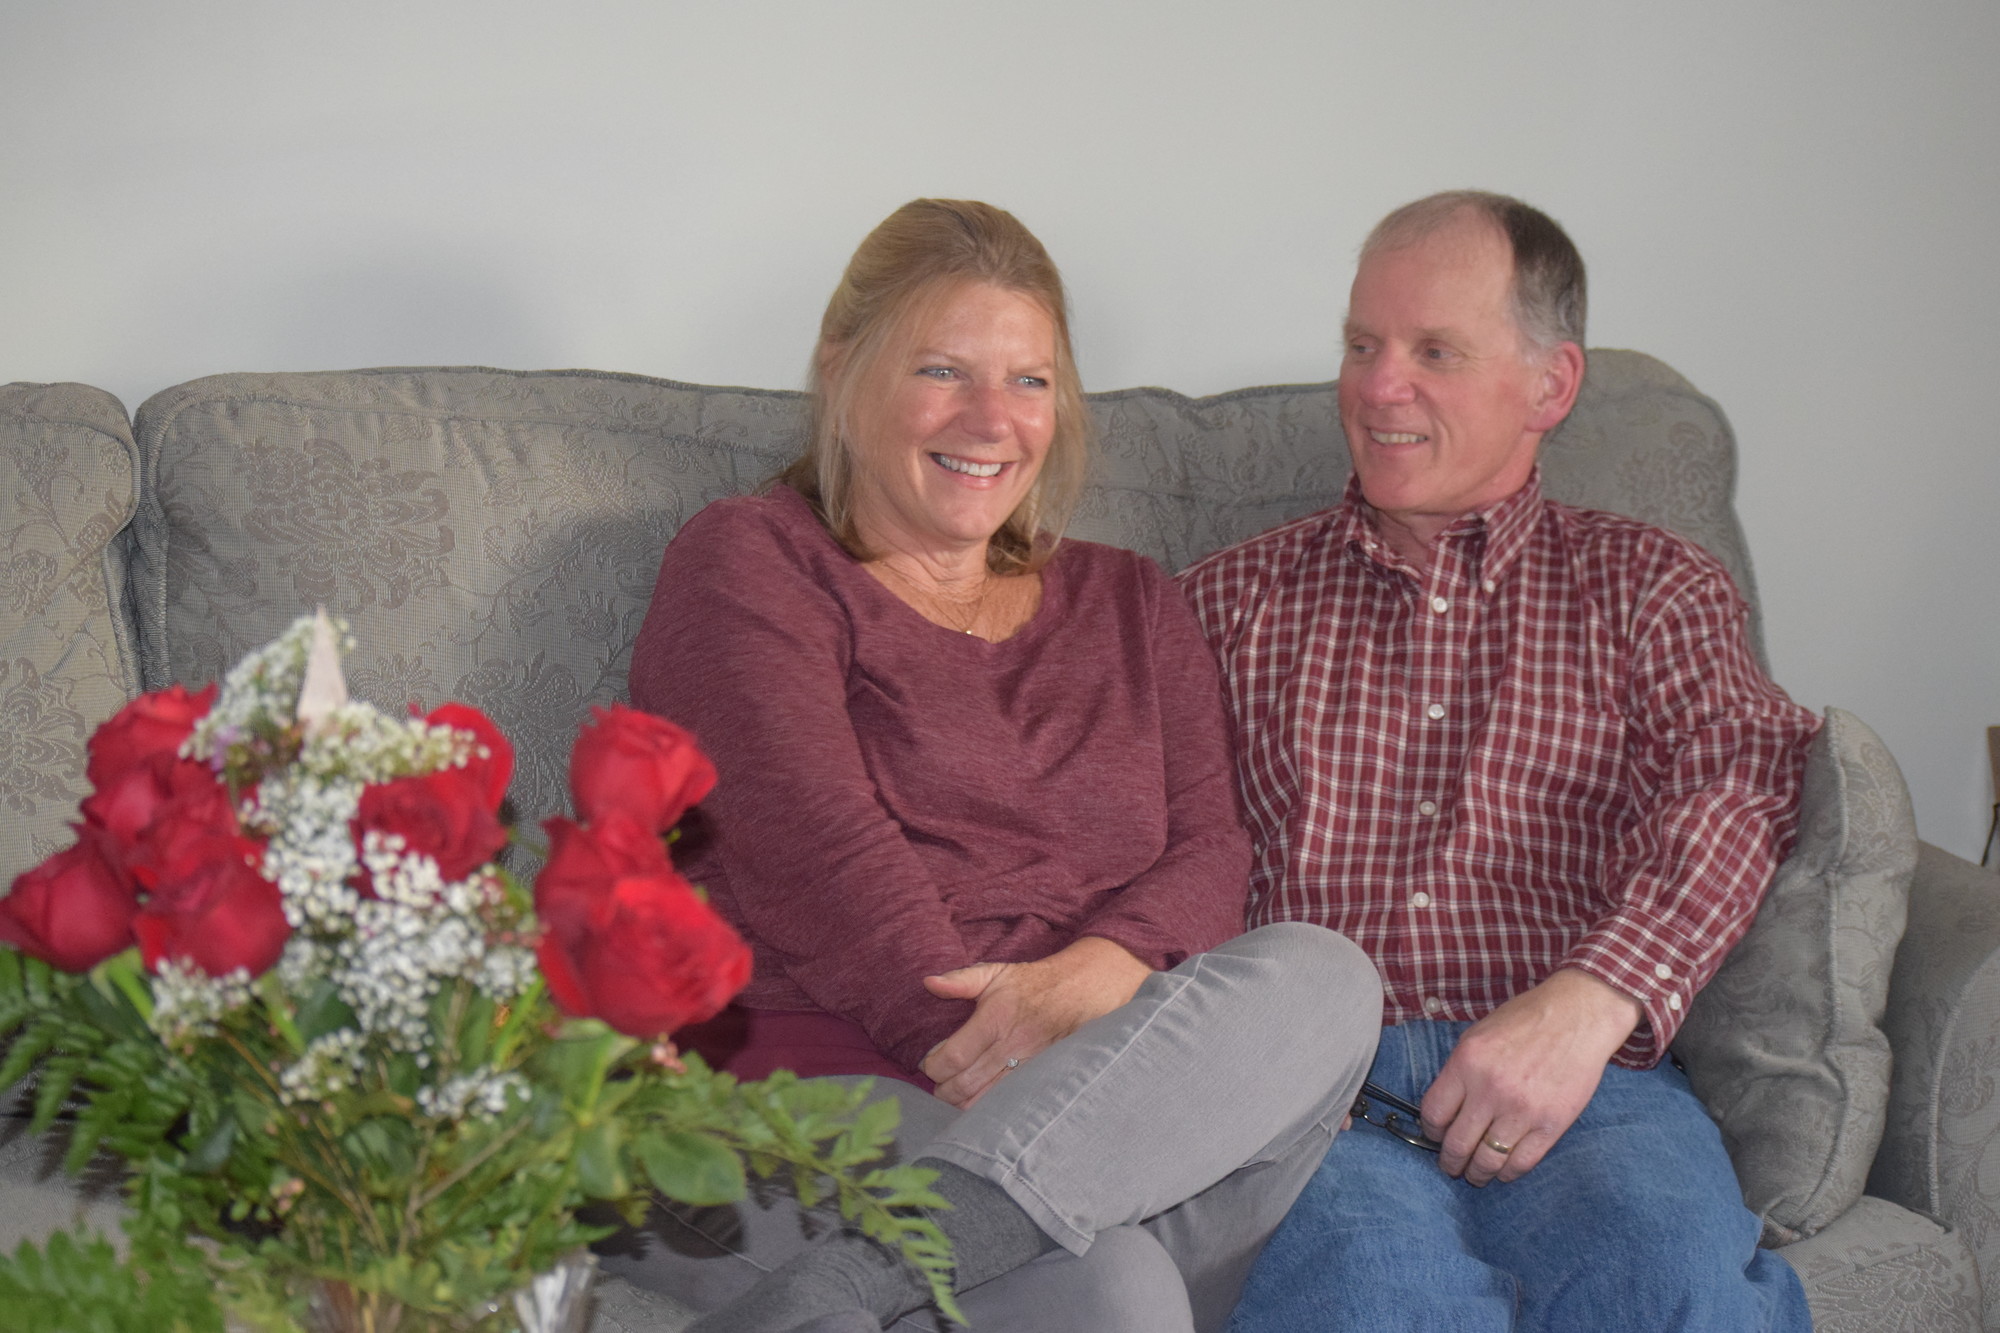 Mary and Brian Roach, of North Wantagh, still remember where they met and formed a bond 35 years ago.